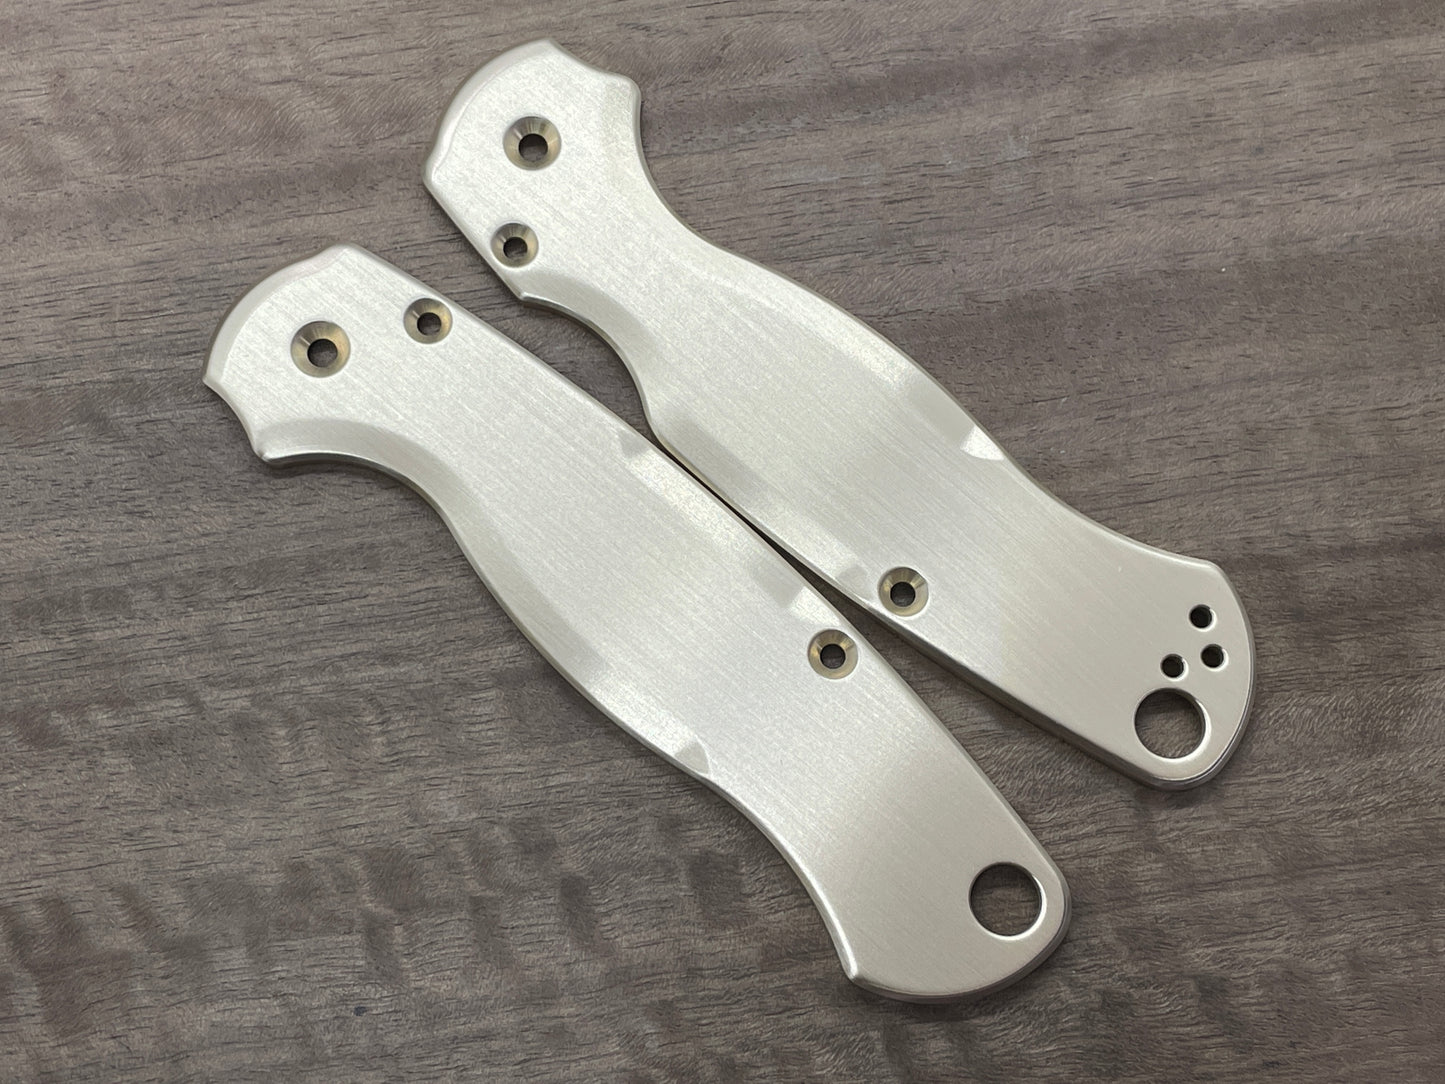 Brushed Brass Scales for Spyderco Paramilitary 2 PM2